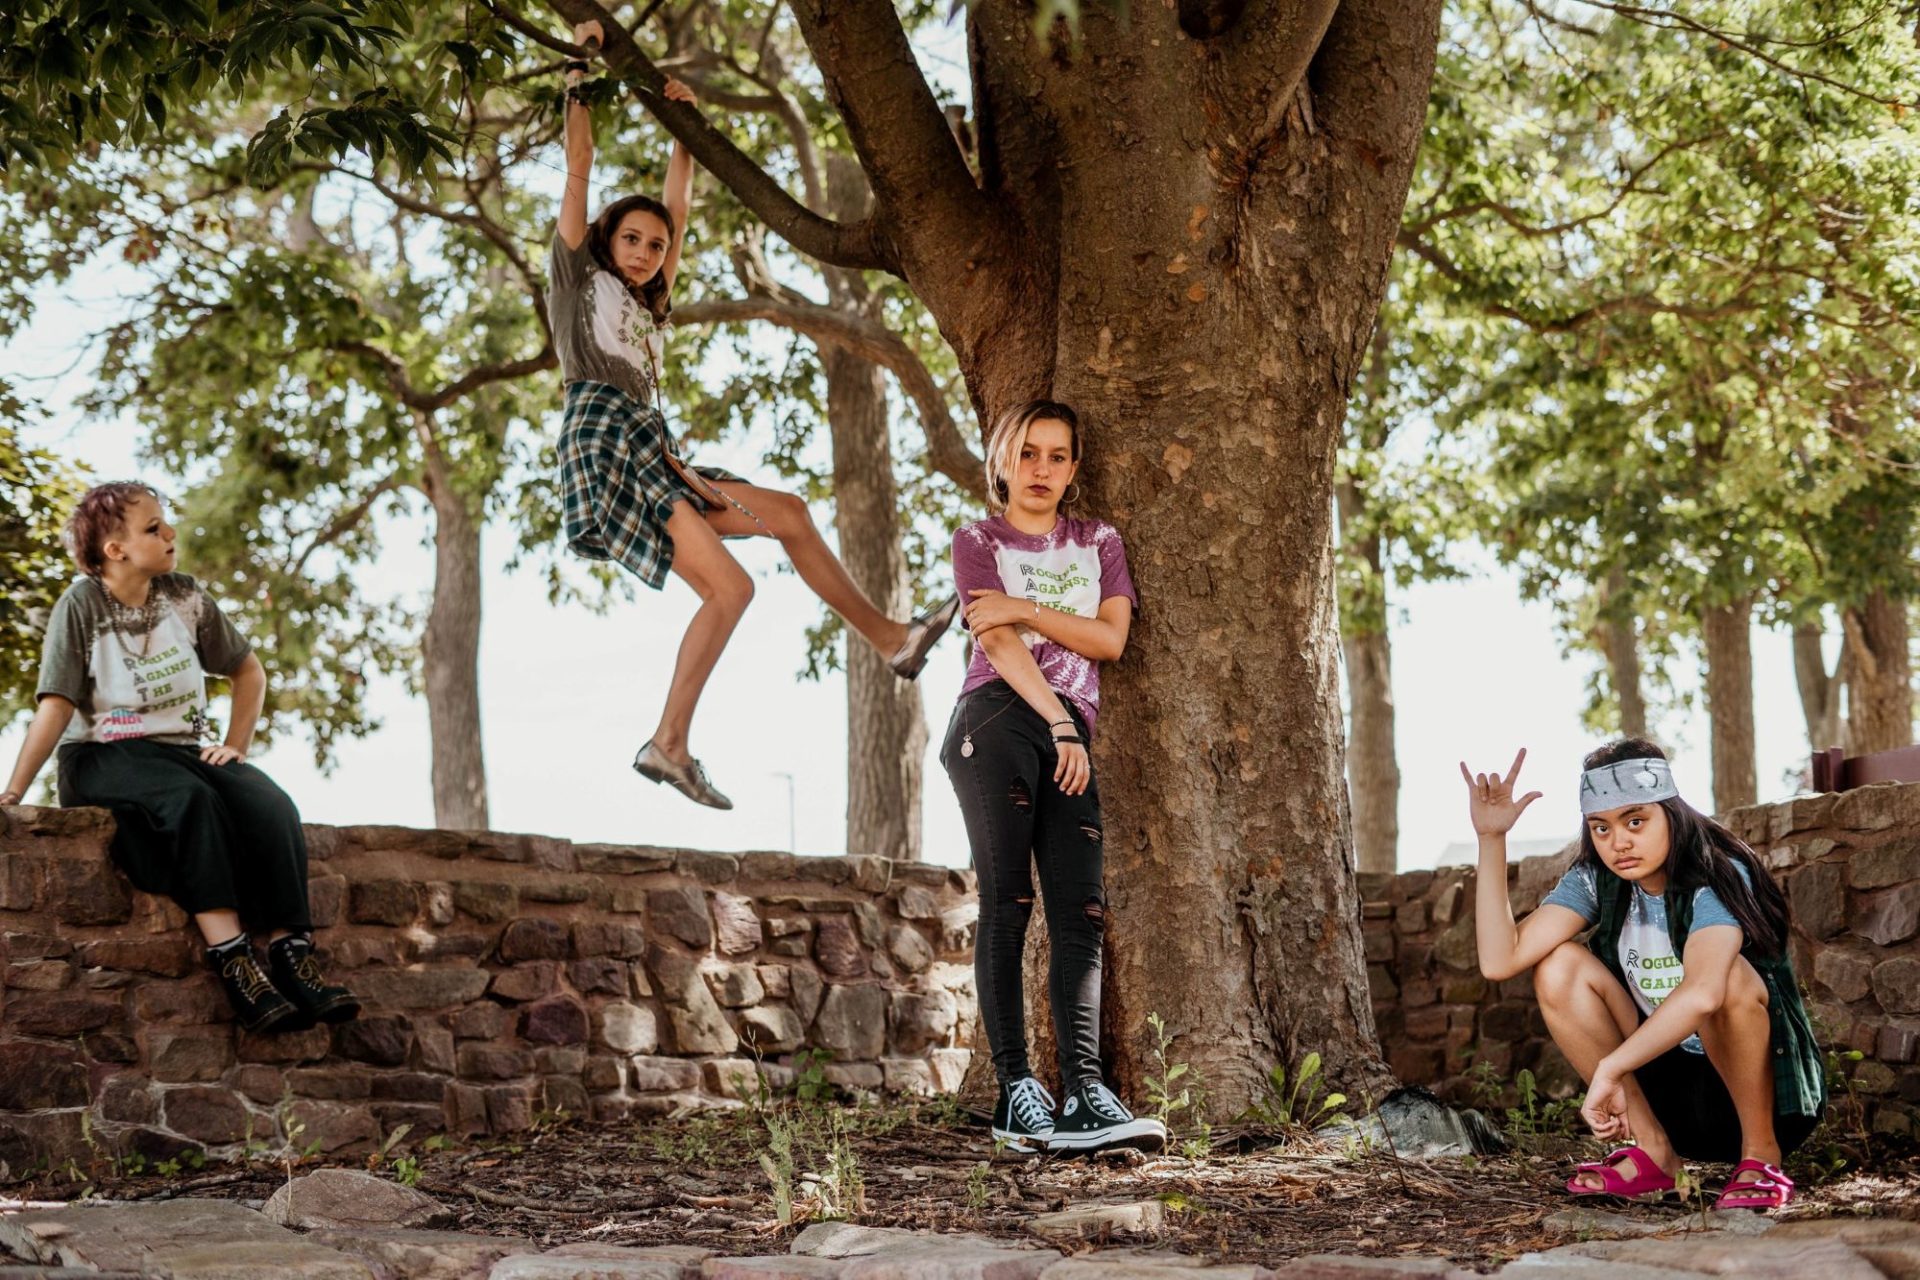 Four young teens are posing near a large tree, surrounded by a low stone wall. One is sitting on the wall, one is hanging from by her hands from a branch, one is leaning against the tree, one is crouched on the ground.